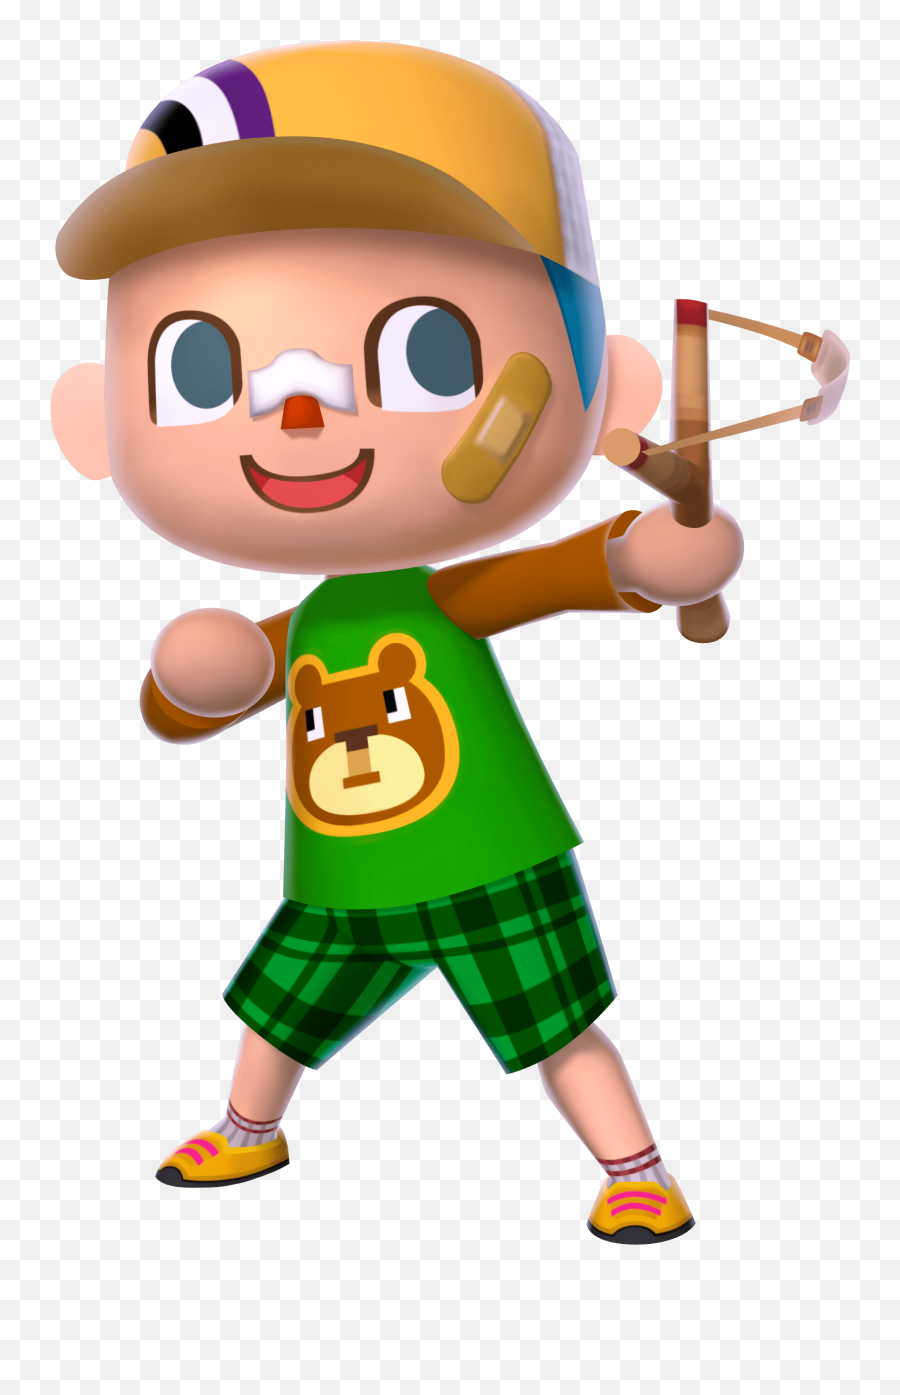 15 Animal Crossing Villager Png For - Animal Crossing New Leaf Villager,Villager Png